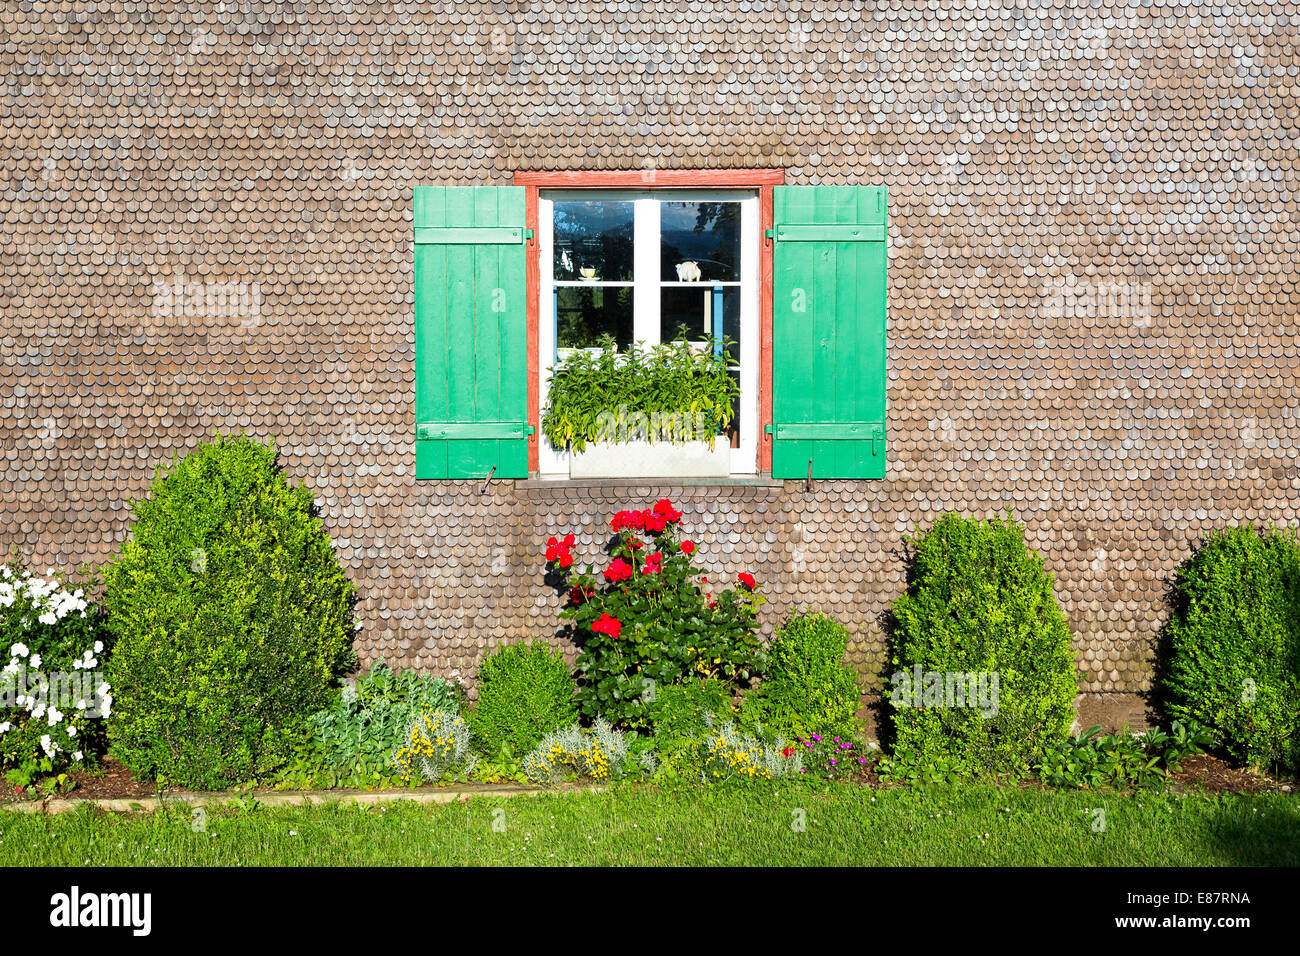 Window with green shutters, with flowers in the front, Reichenau, Baden-Württemberg, Germany Stock Photo